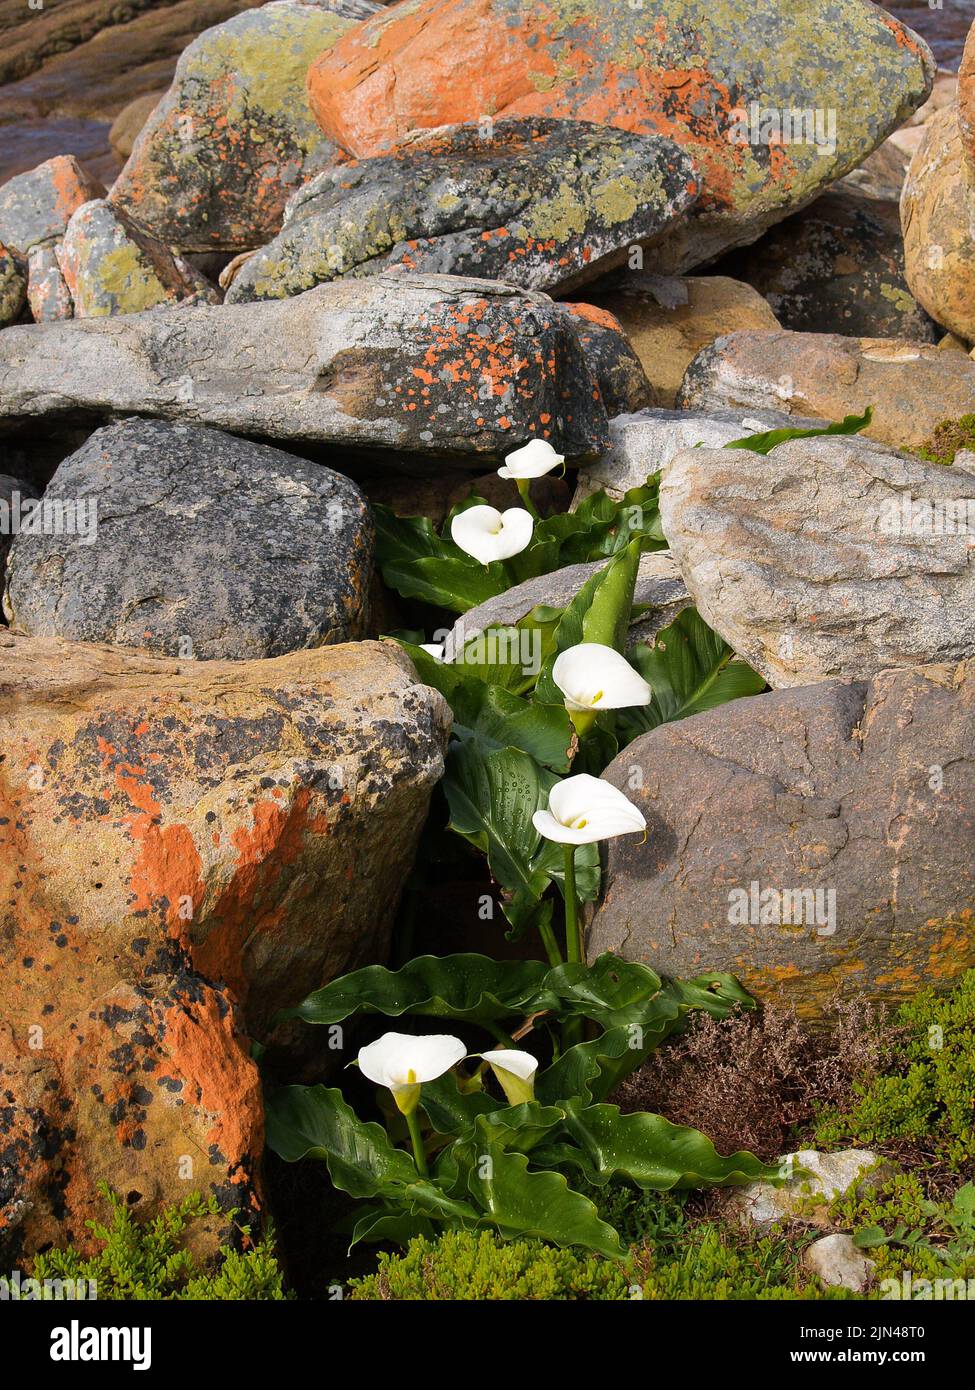 Arum lily growing amongst Rocks and large boulders on coastal edge at Cape of Good Hope, South Africa. Stock Photo